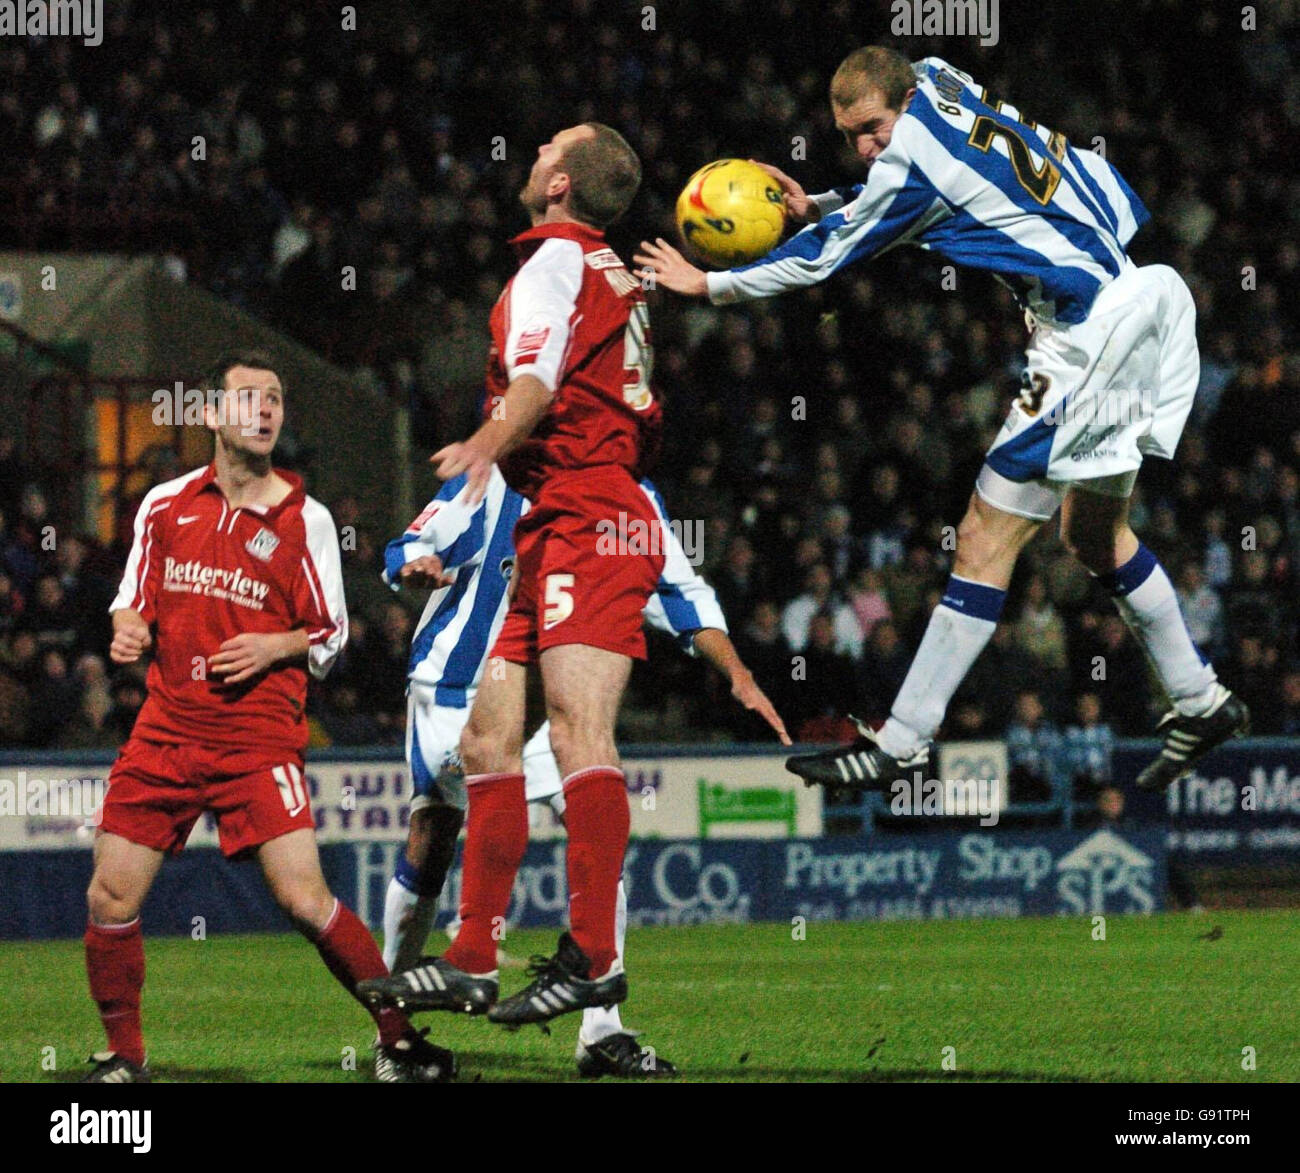 Huddersfield's Andy Booth (R) has his header blocked by Southend's Spencer Prior during the Coca-Cola League One match at the Galpharm Stadium, Huddersfield, Saturday December 17, 2005. PRESS ASSOCIATION Photo. Photo credit should read: PA. NO UNOFFICIAL CLUB WEBSITE USE. Stock Photo